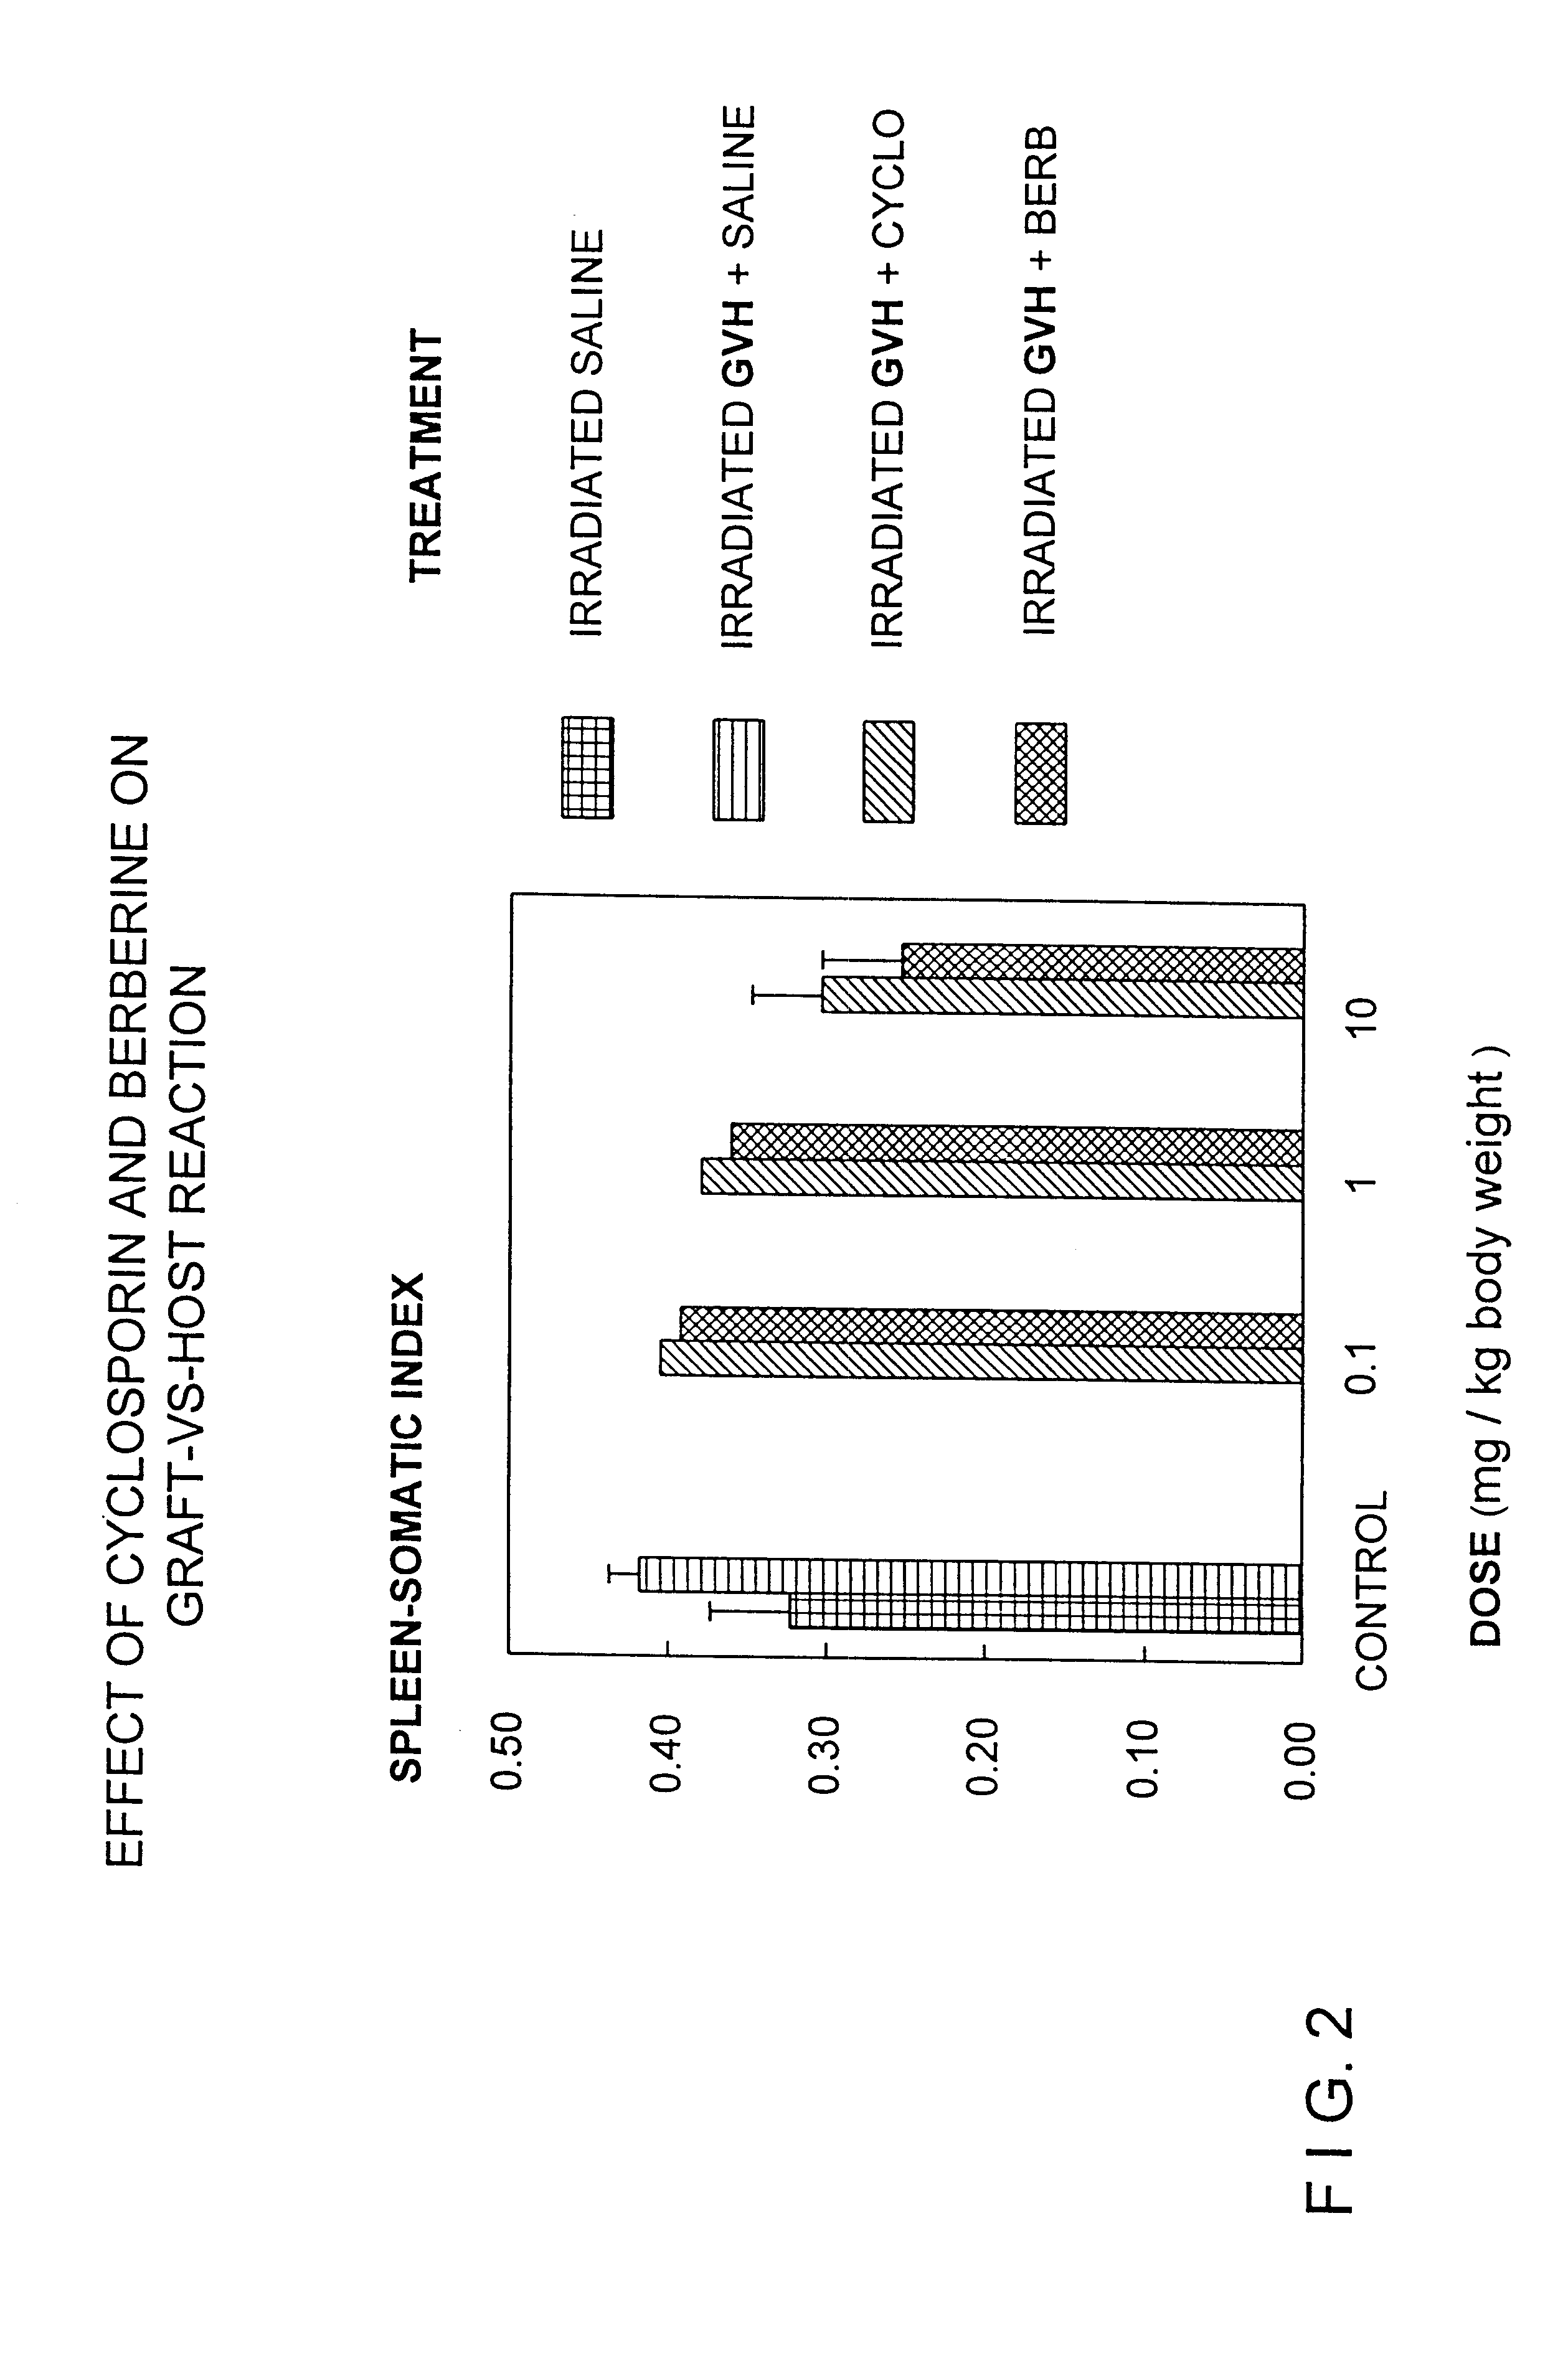 Methods for prevention and treatment of septic shock